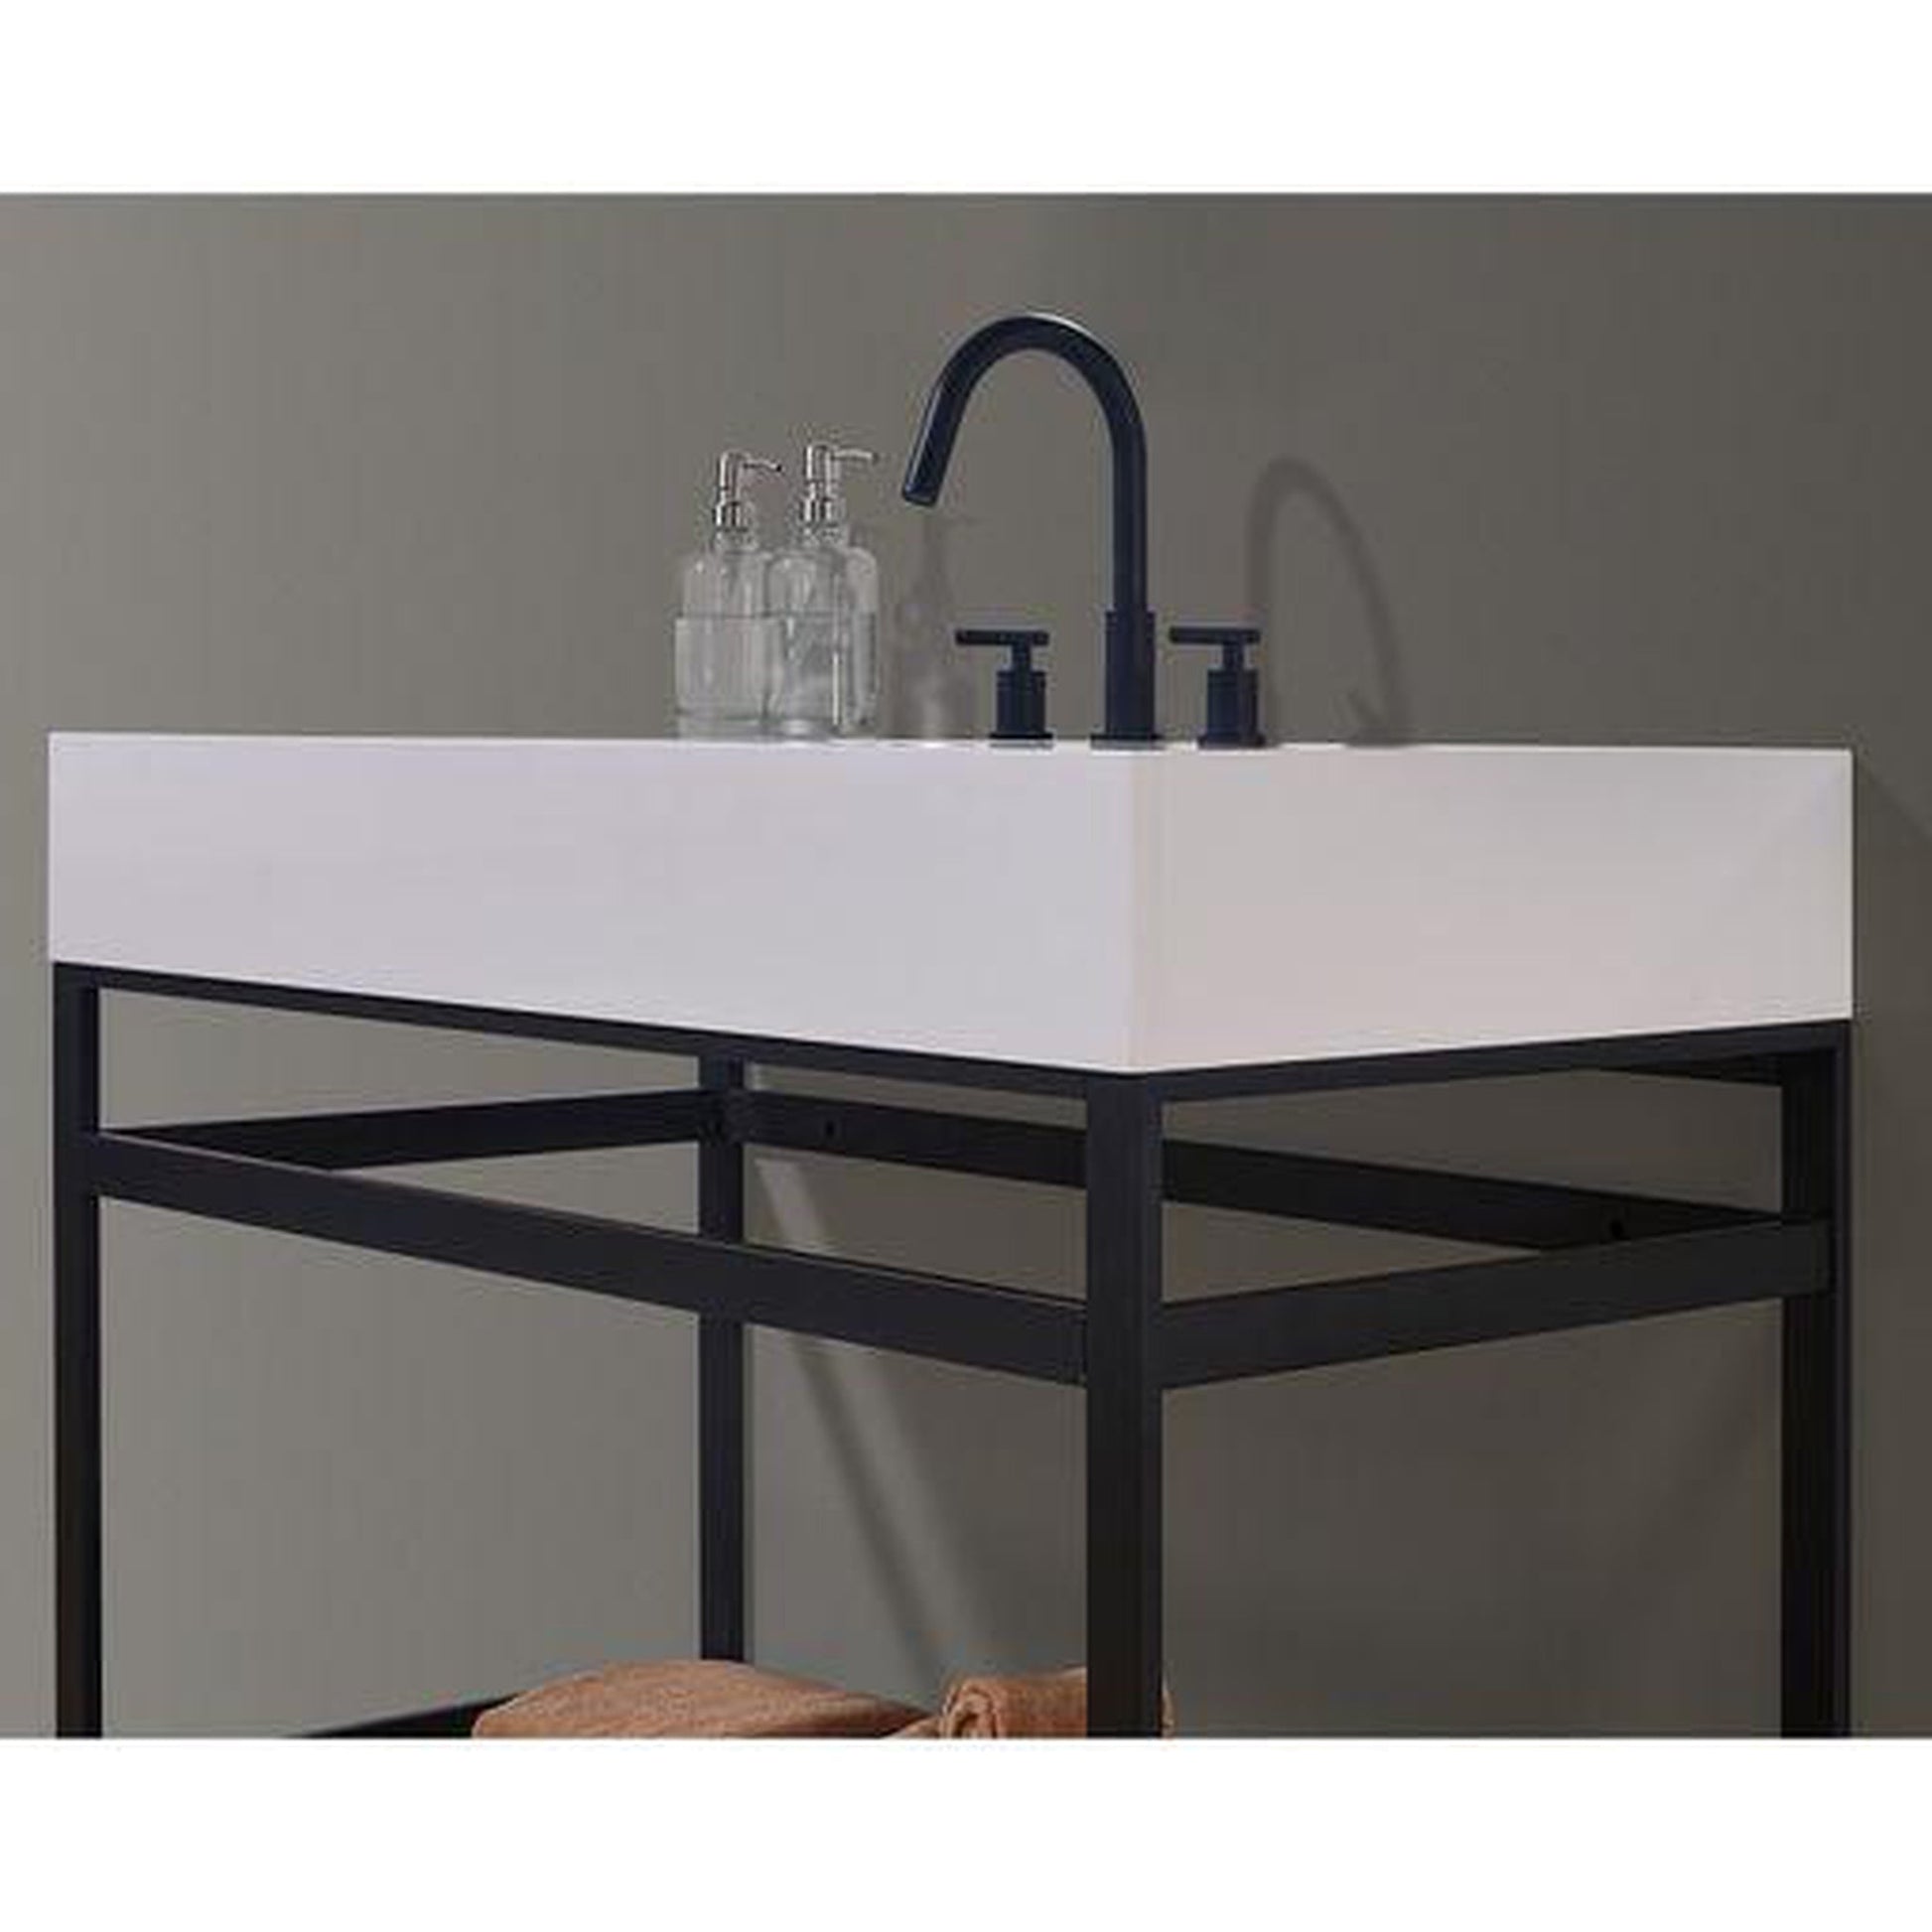 Altair Edolo 42" Matte Black Single Stainless Steel Bathroom Vanity Set Console With Snow White Stone Top, Single Rectangular Undermount Ceramic Sink, and Safety Overflow Hole